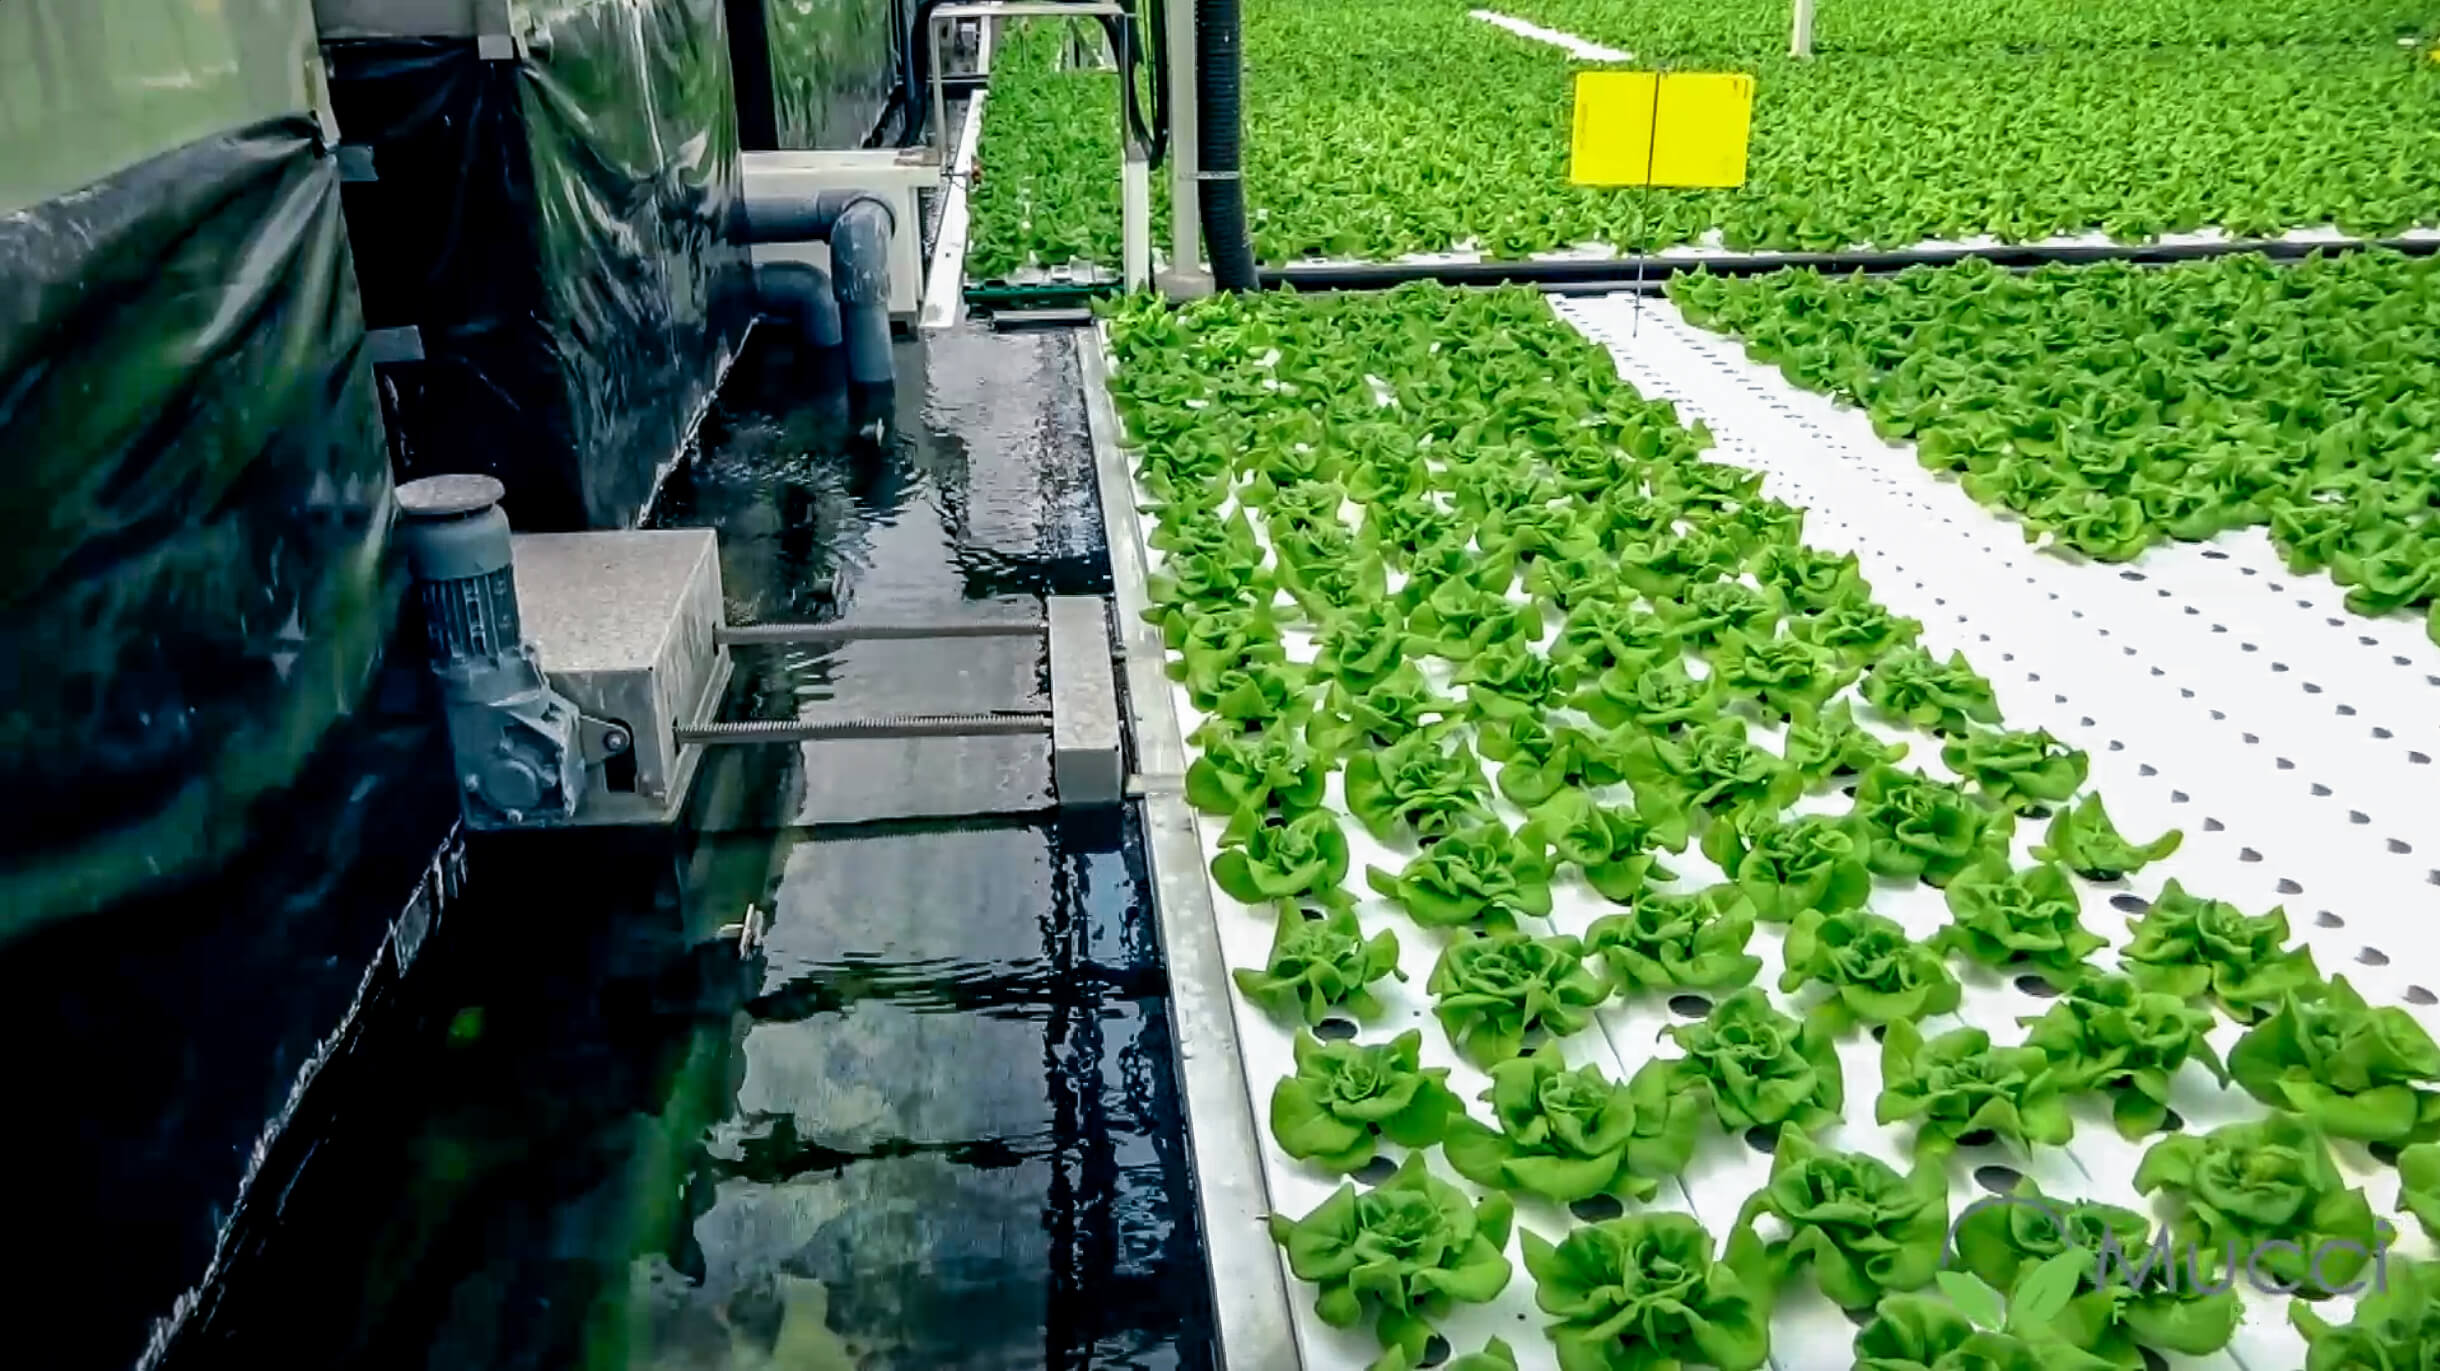 deep water culture growing systems (hydroponic)